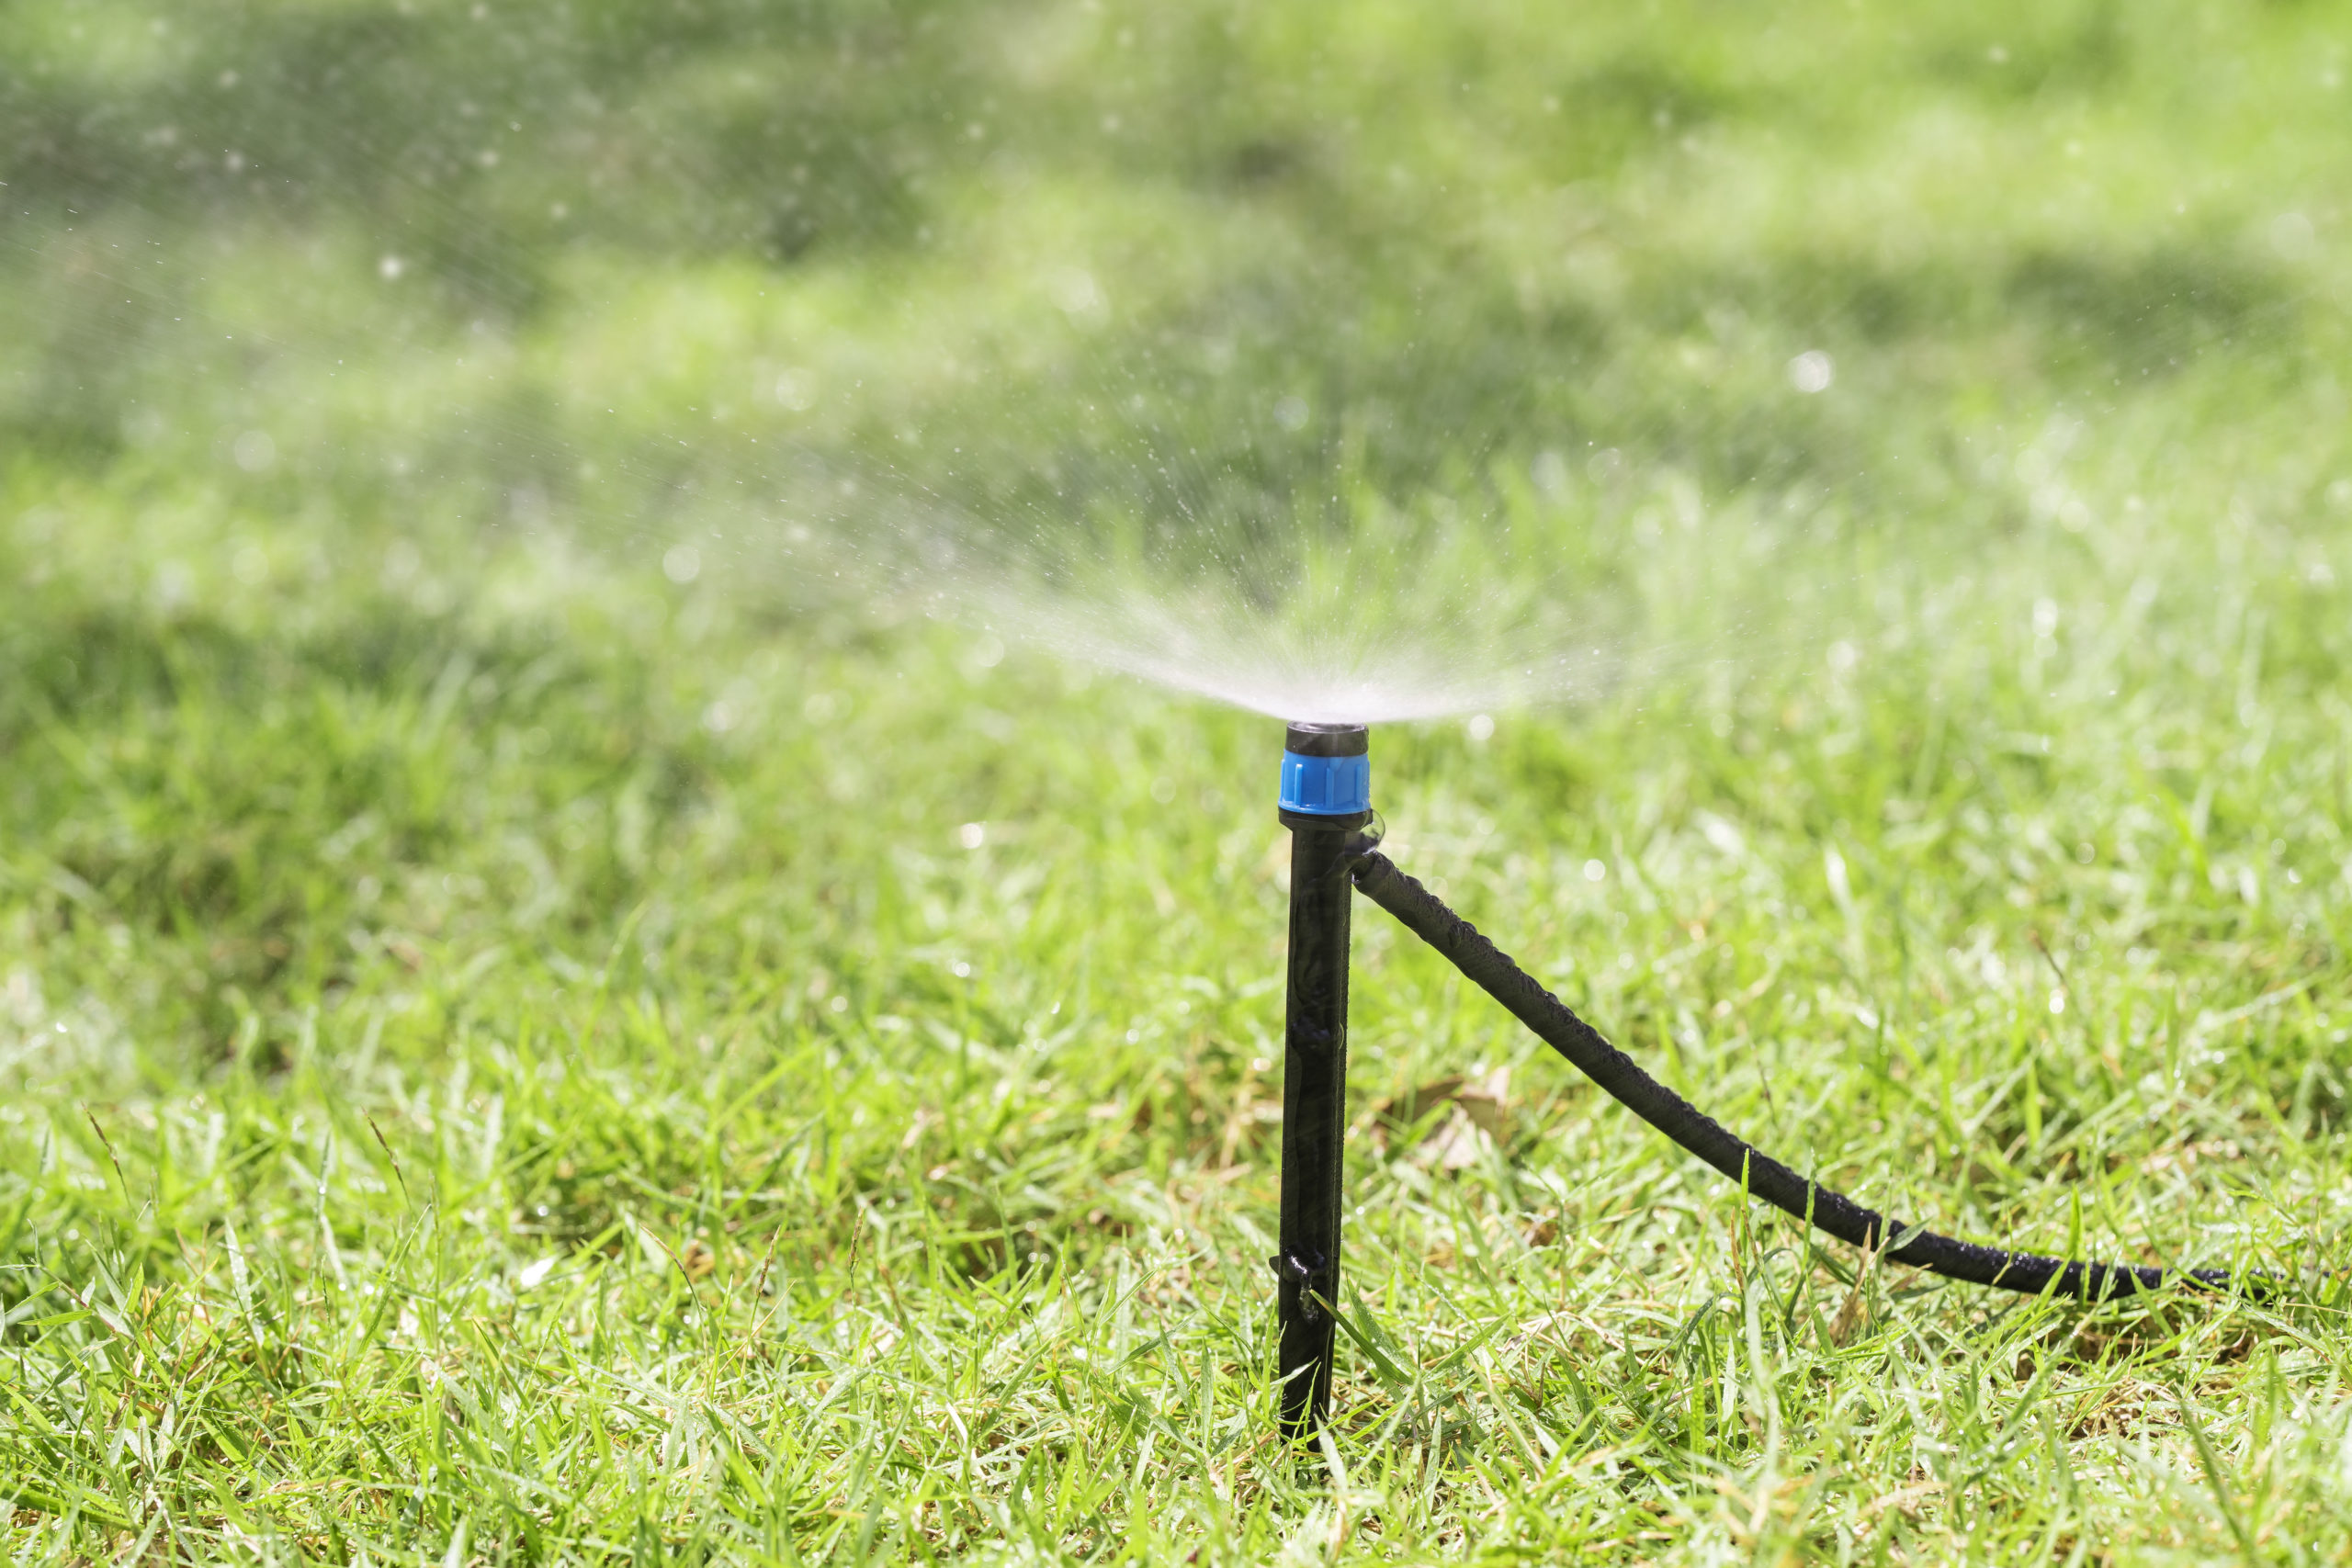 close-up-automatic-sprinklers-system-watering-lawn-scaled